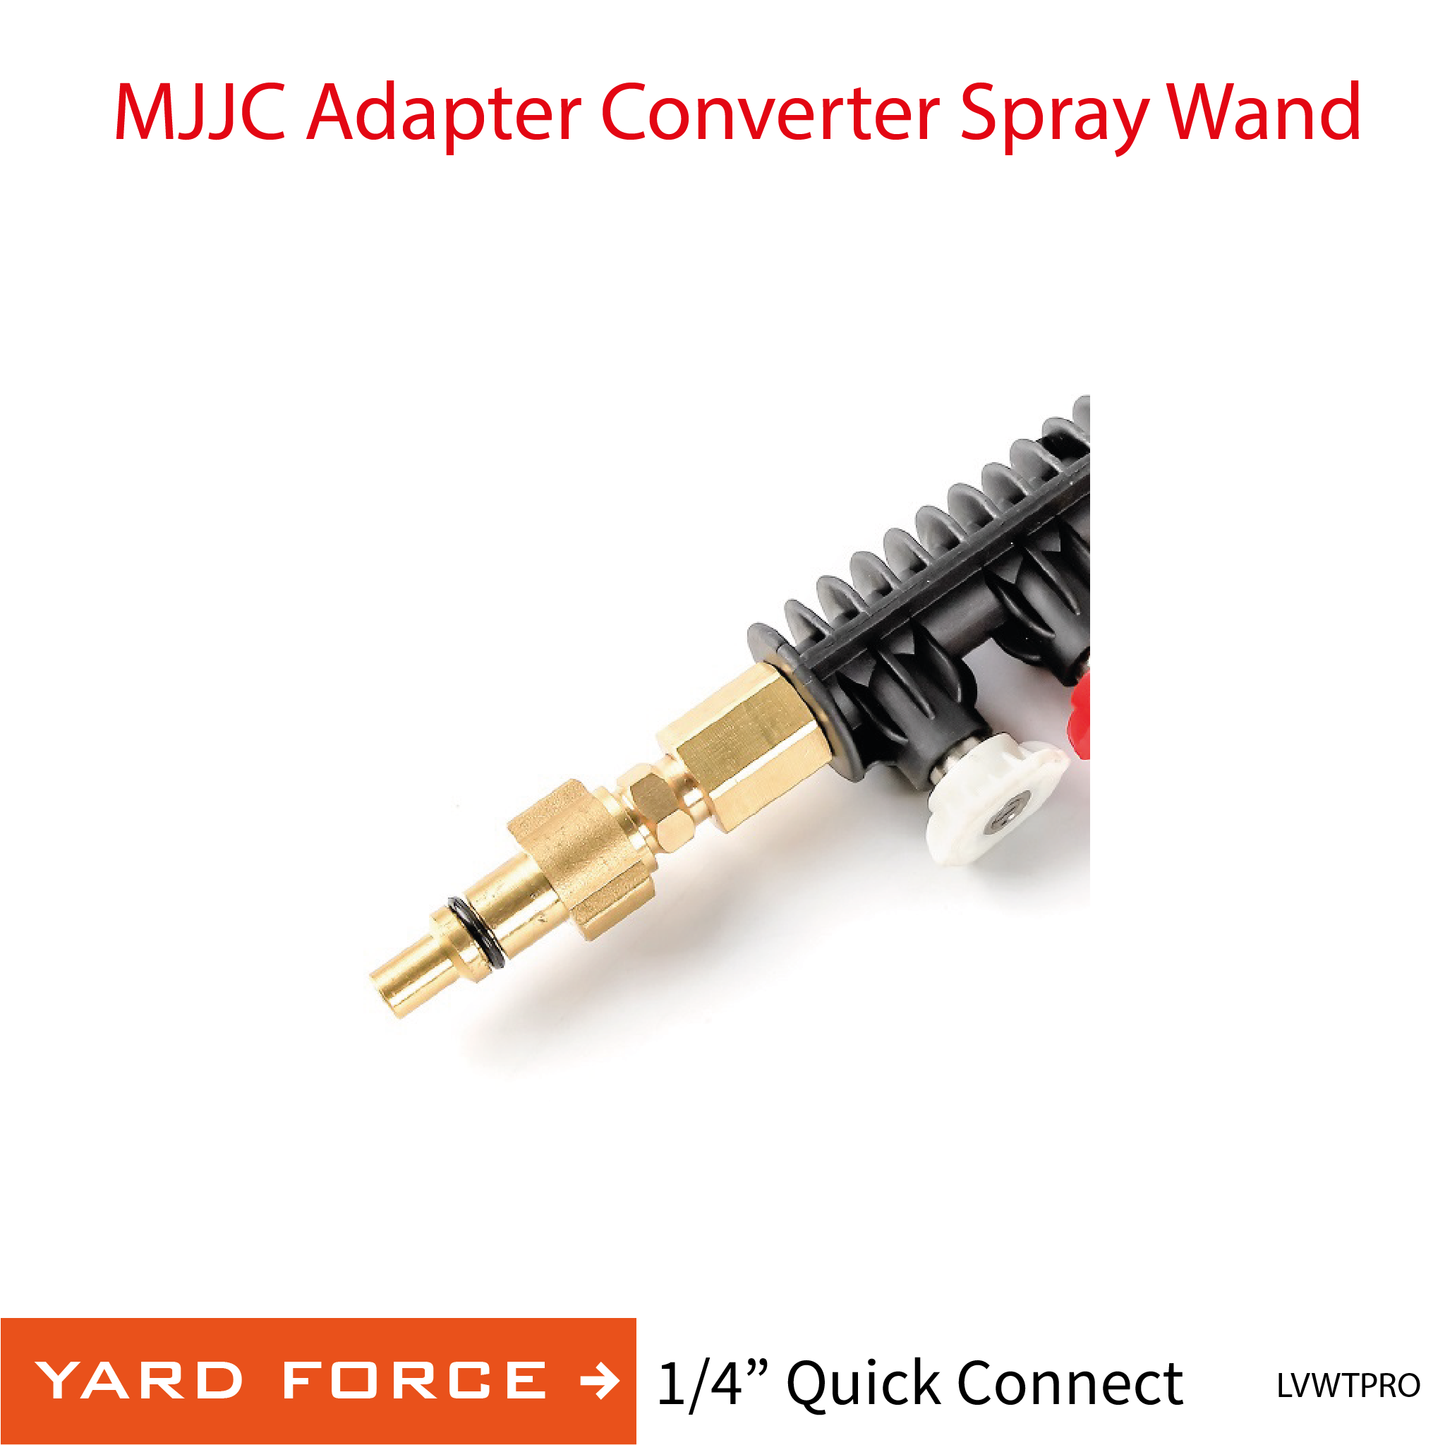 Yard Force MJJC Adapter Conversion Converter pressure washer Spray Wand with 5 spray tips